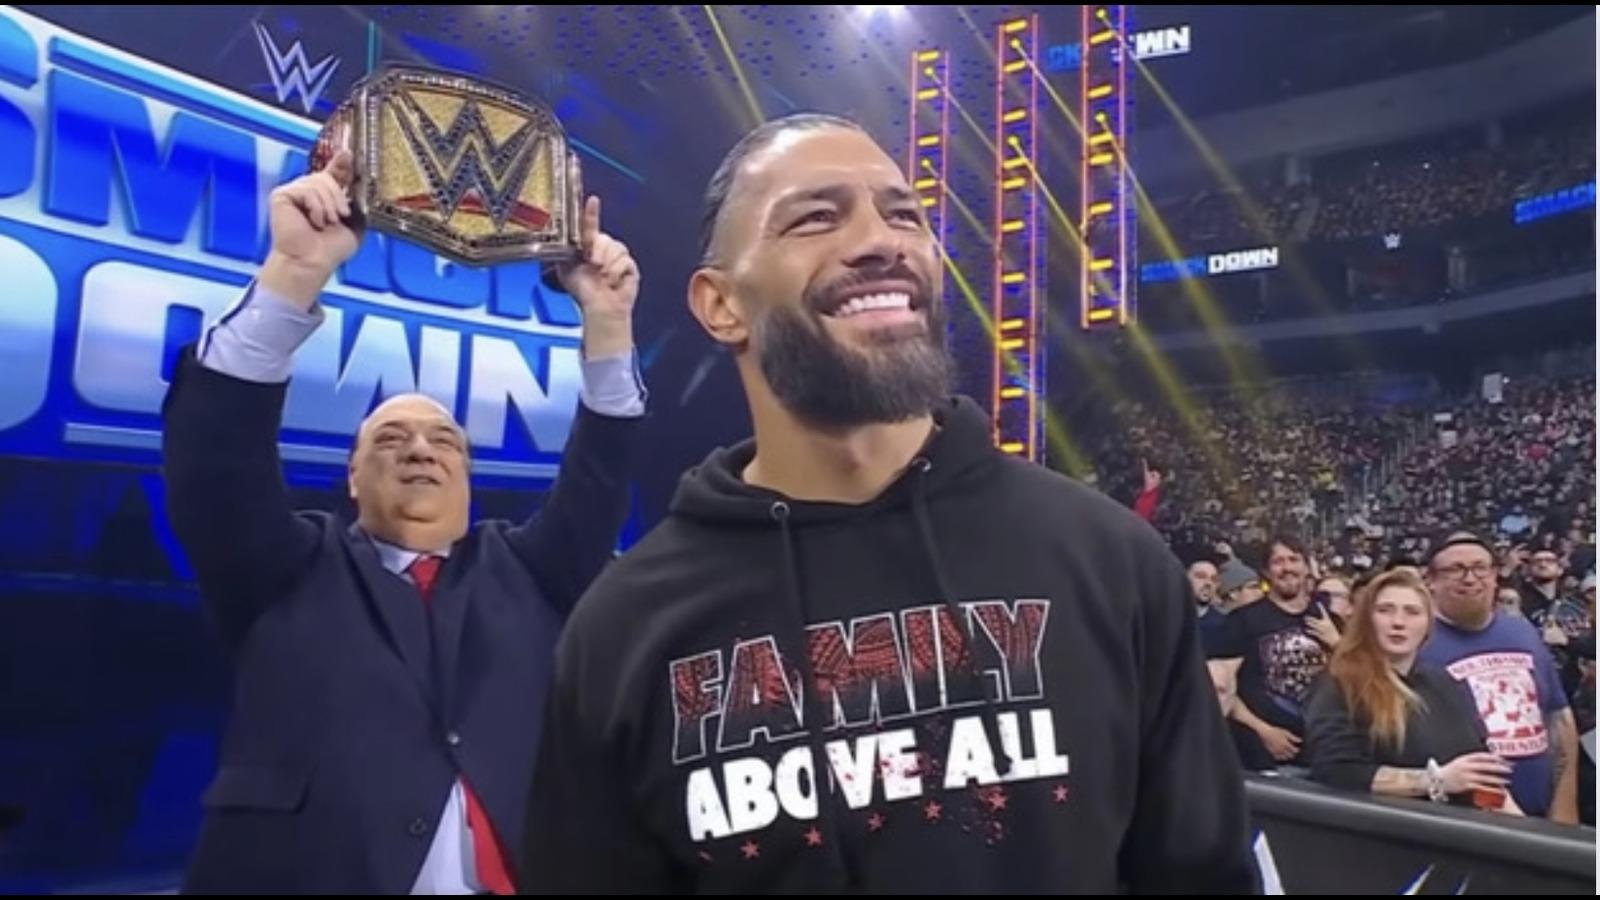 One WWE fan went viral after roasting Roman Reigns during Friday Night Smackdown